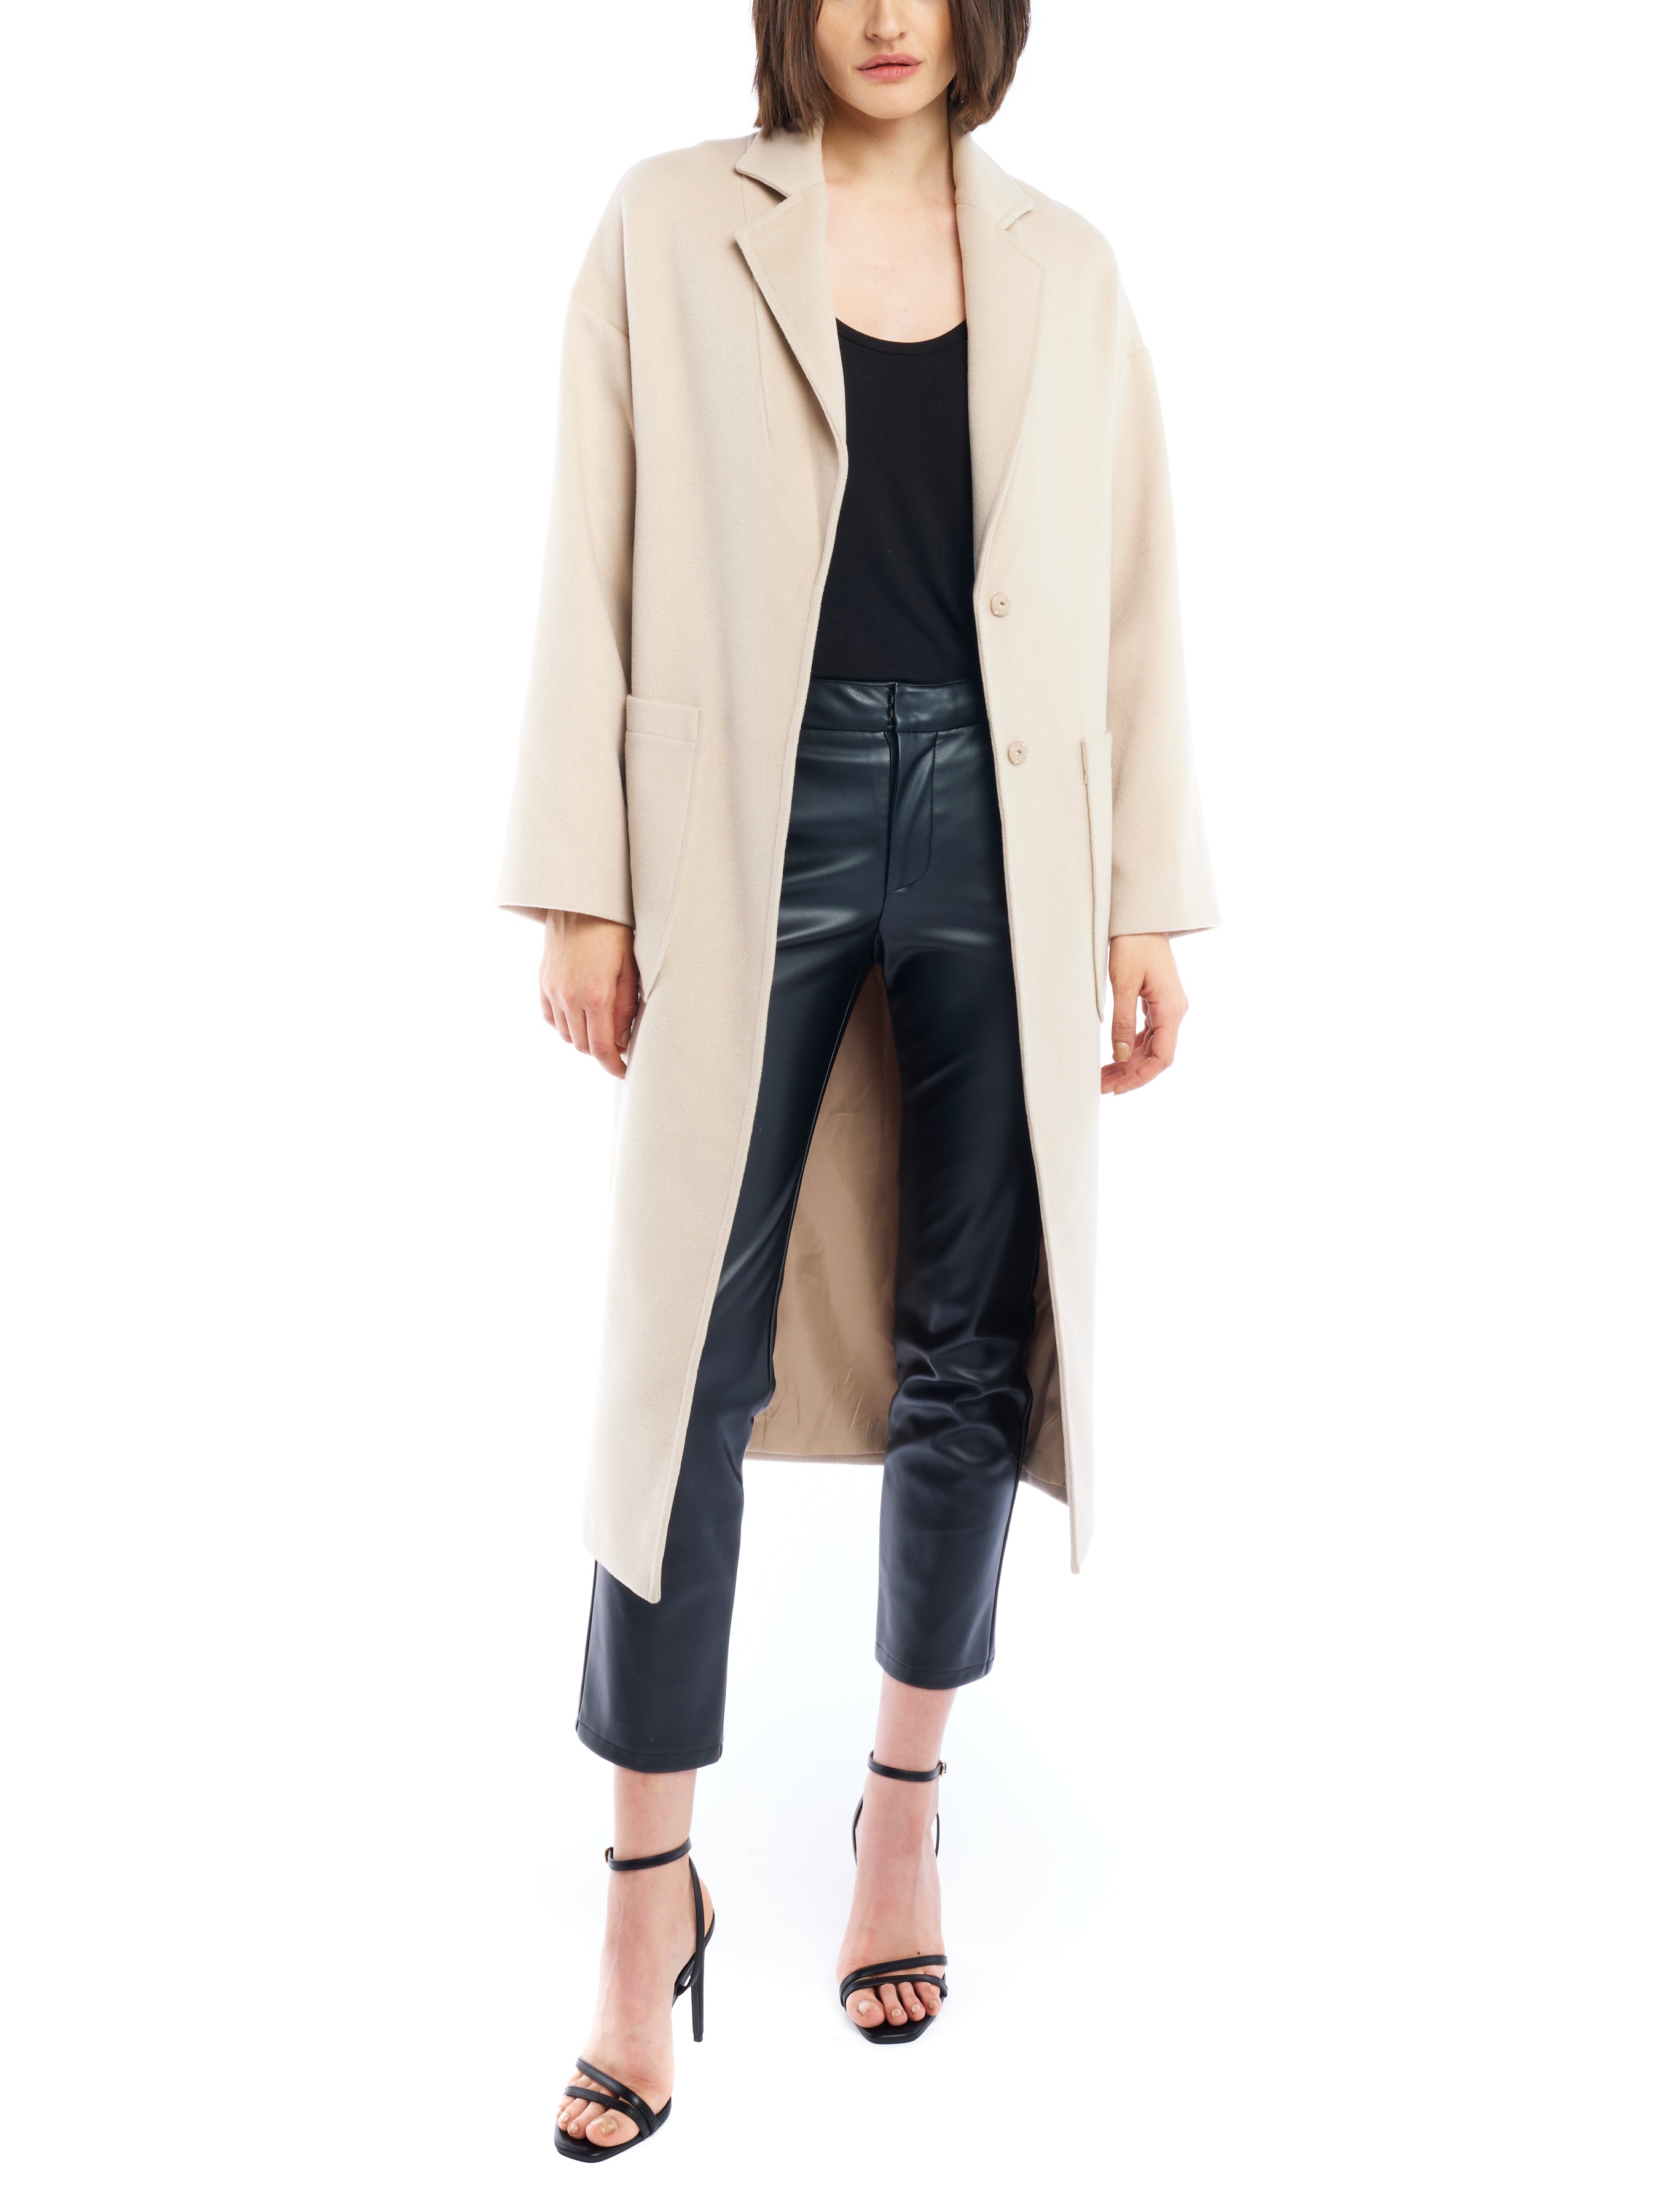 Clifton midi length jacket featuring hidden snap closure and large front pockets in taupe - front